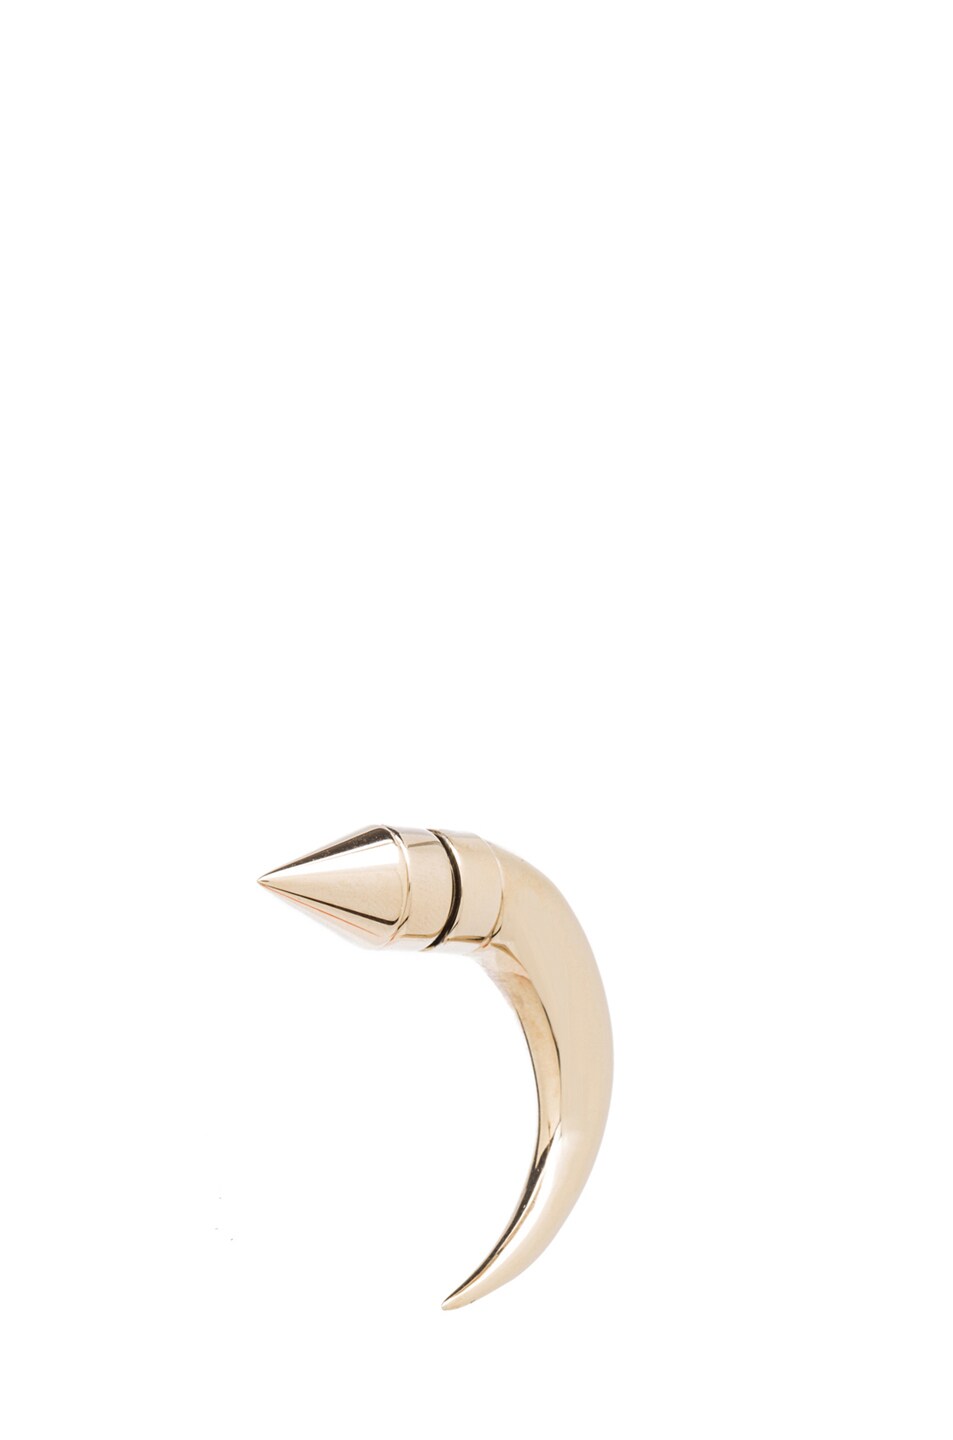 Givenchy Cone Shark Tooth Earring in Pale Gold | FWRD